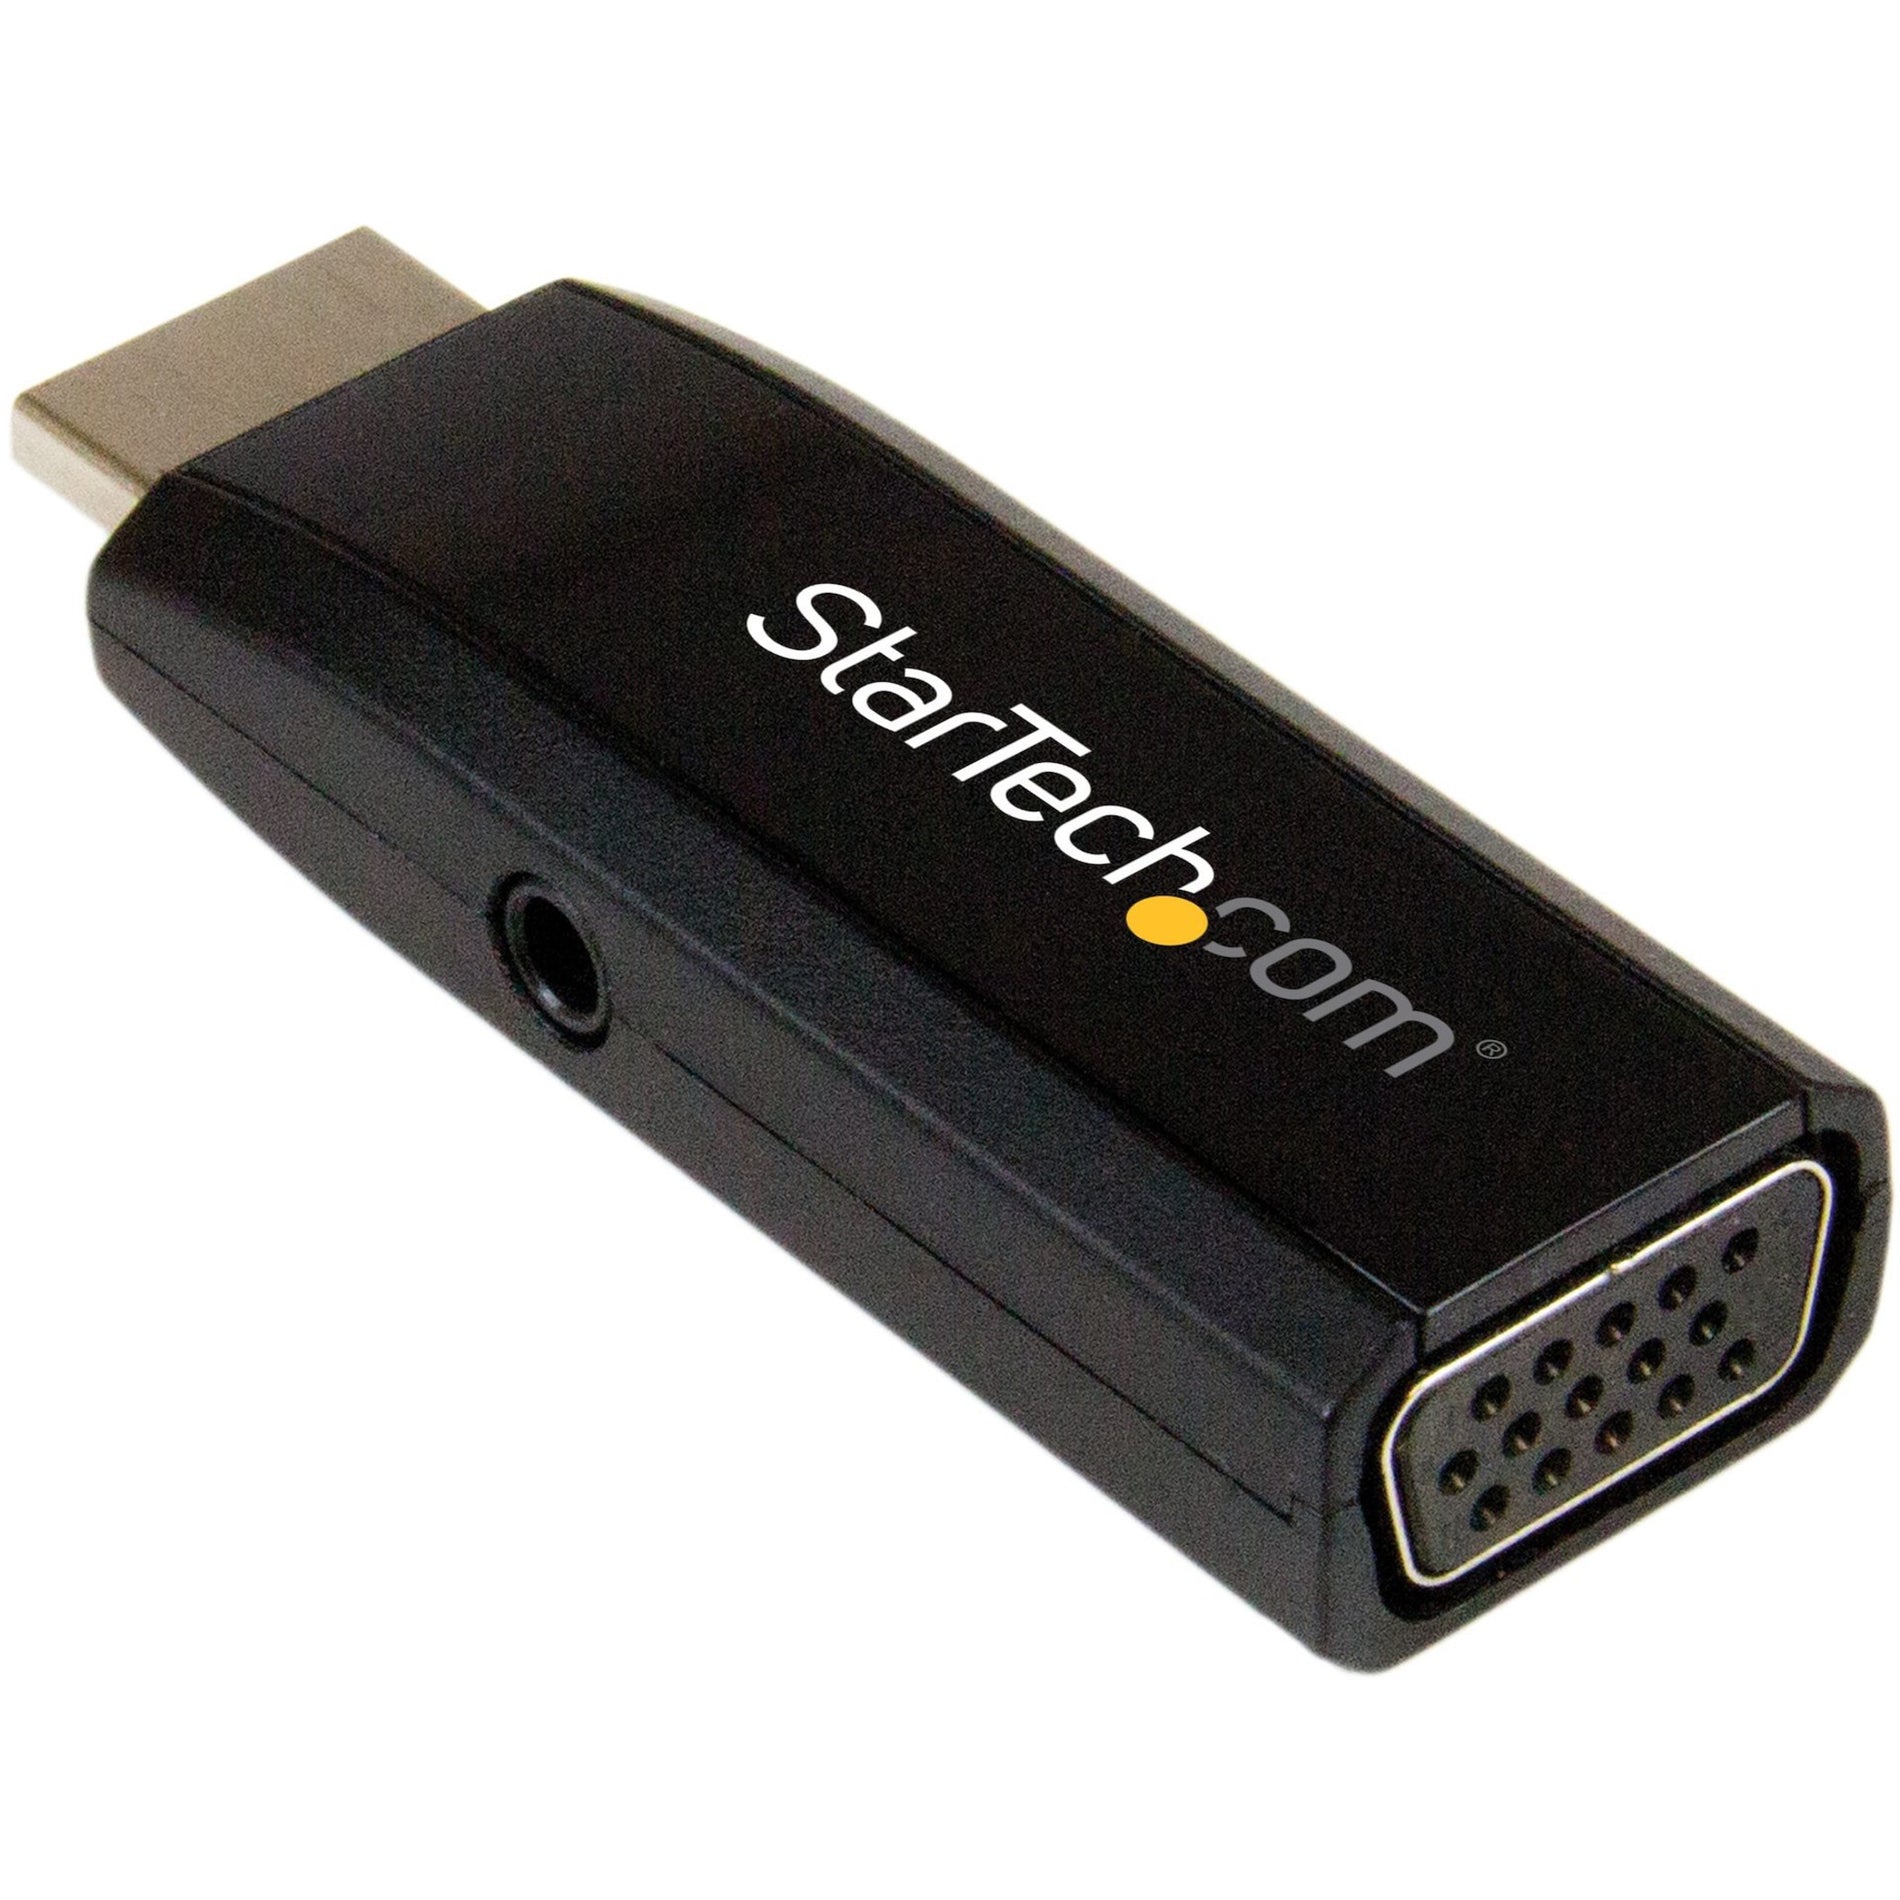 StarTech.com HD2VGAMICRA HDMI to VGA Converter with Audio - Compact Adapter - 1920x1200, Plug and Play, Black